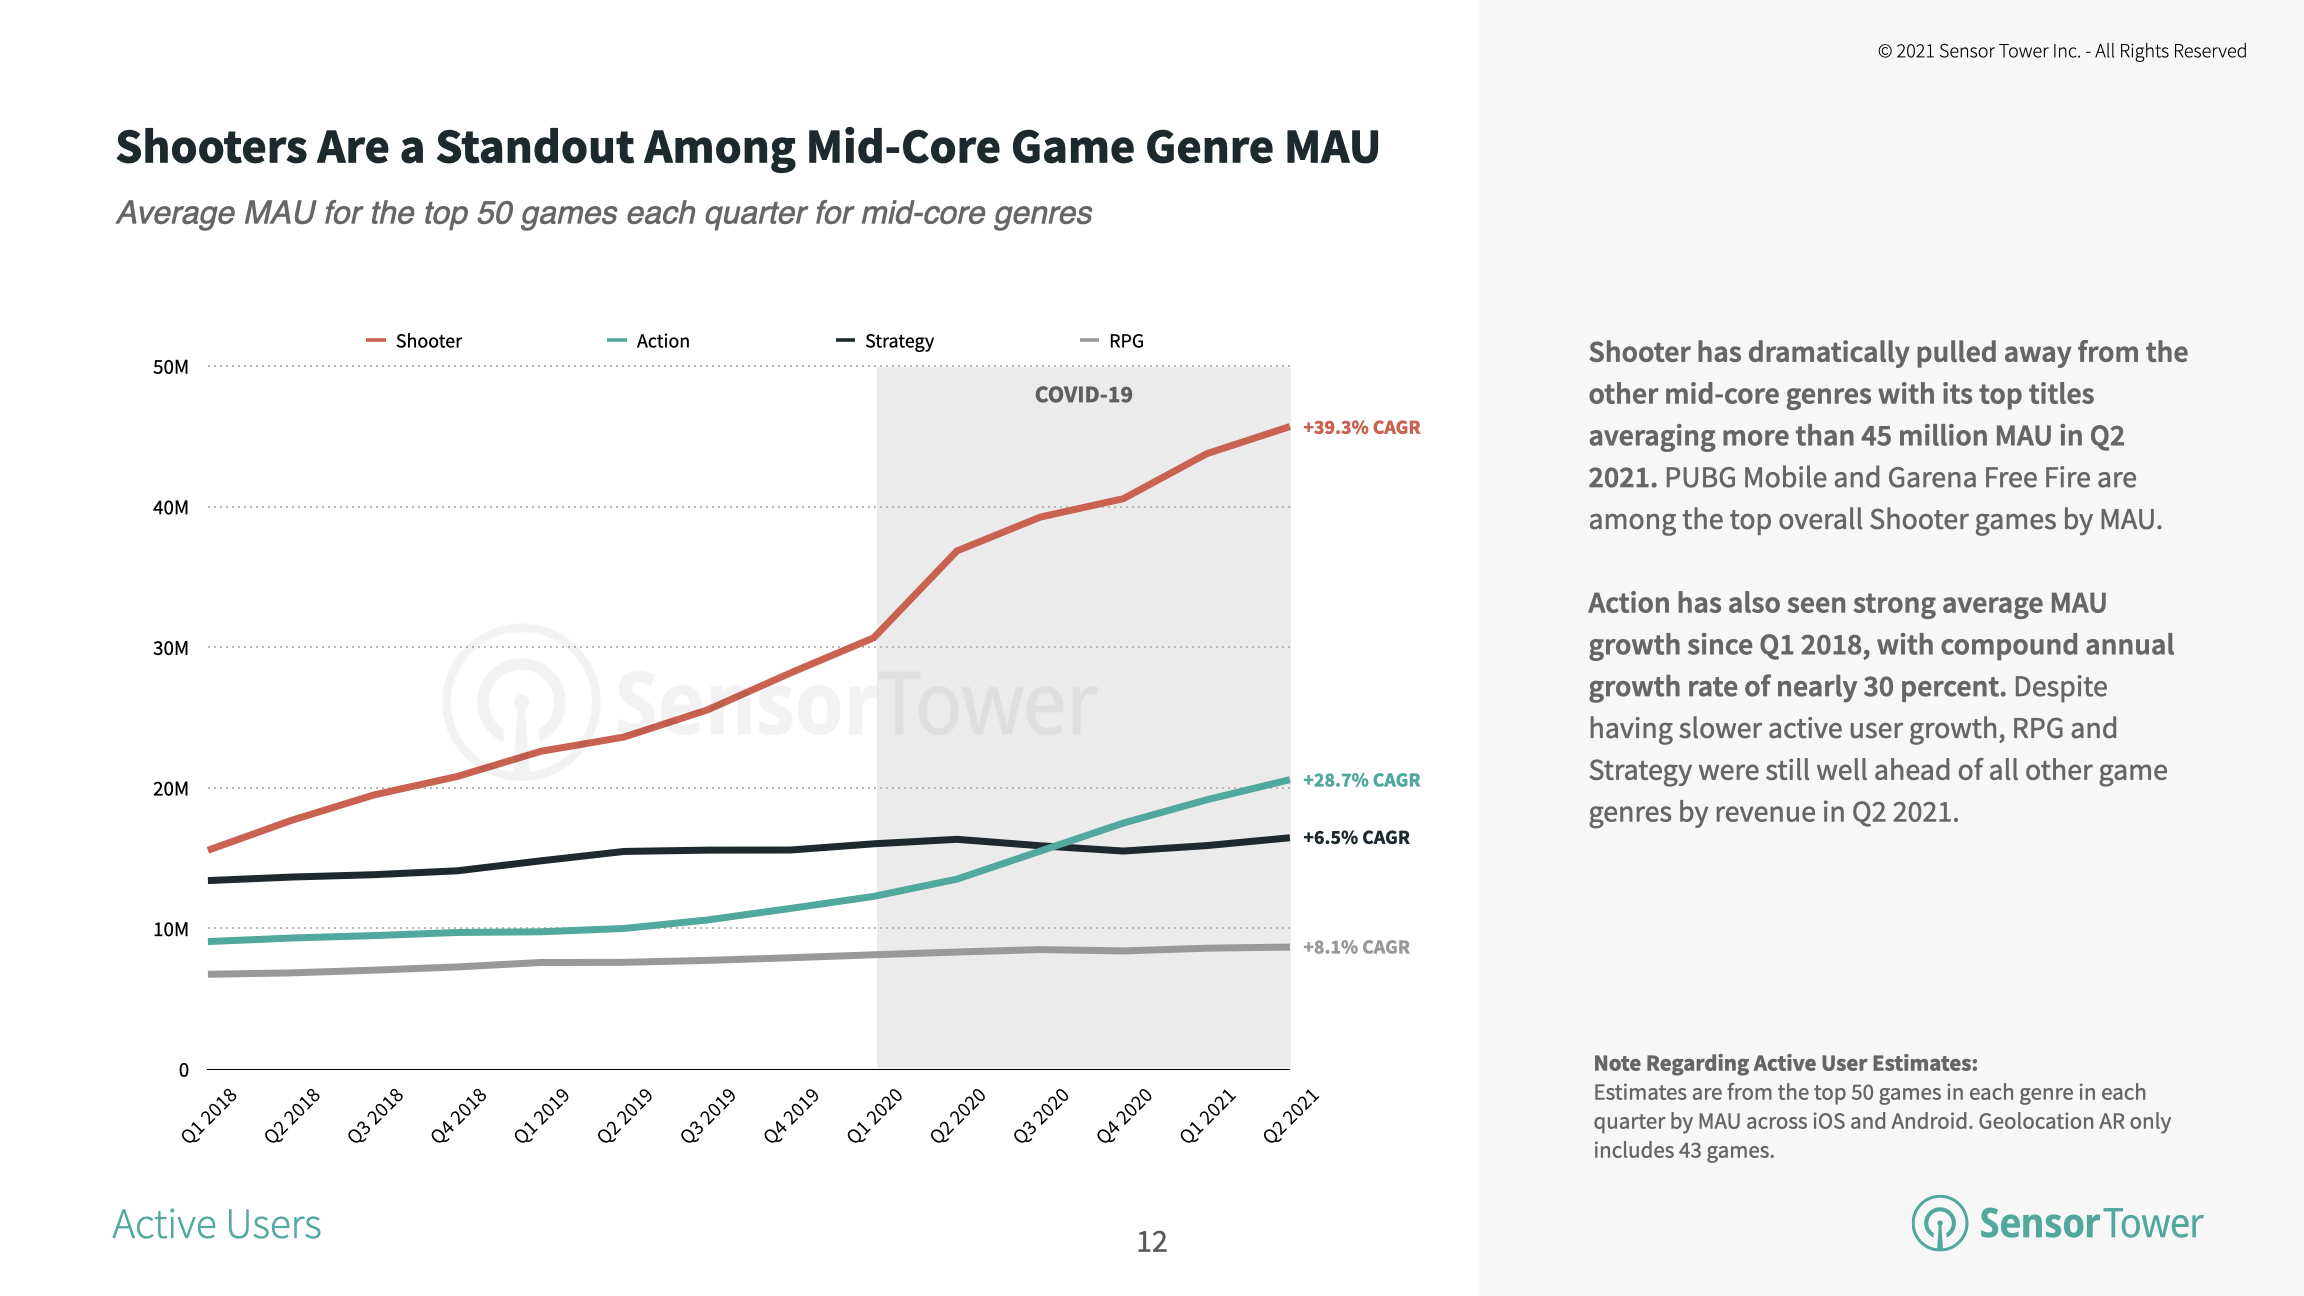 The top 50 shooter games averaged 7.6 million daily active users in Q2 2021